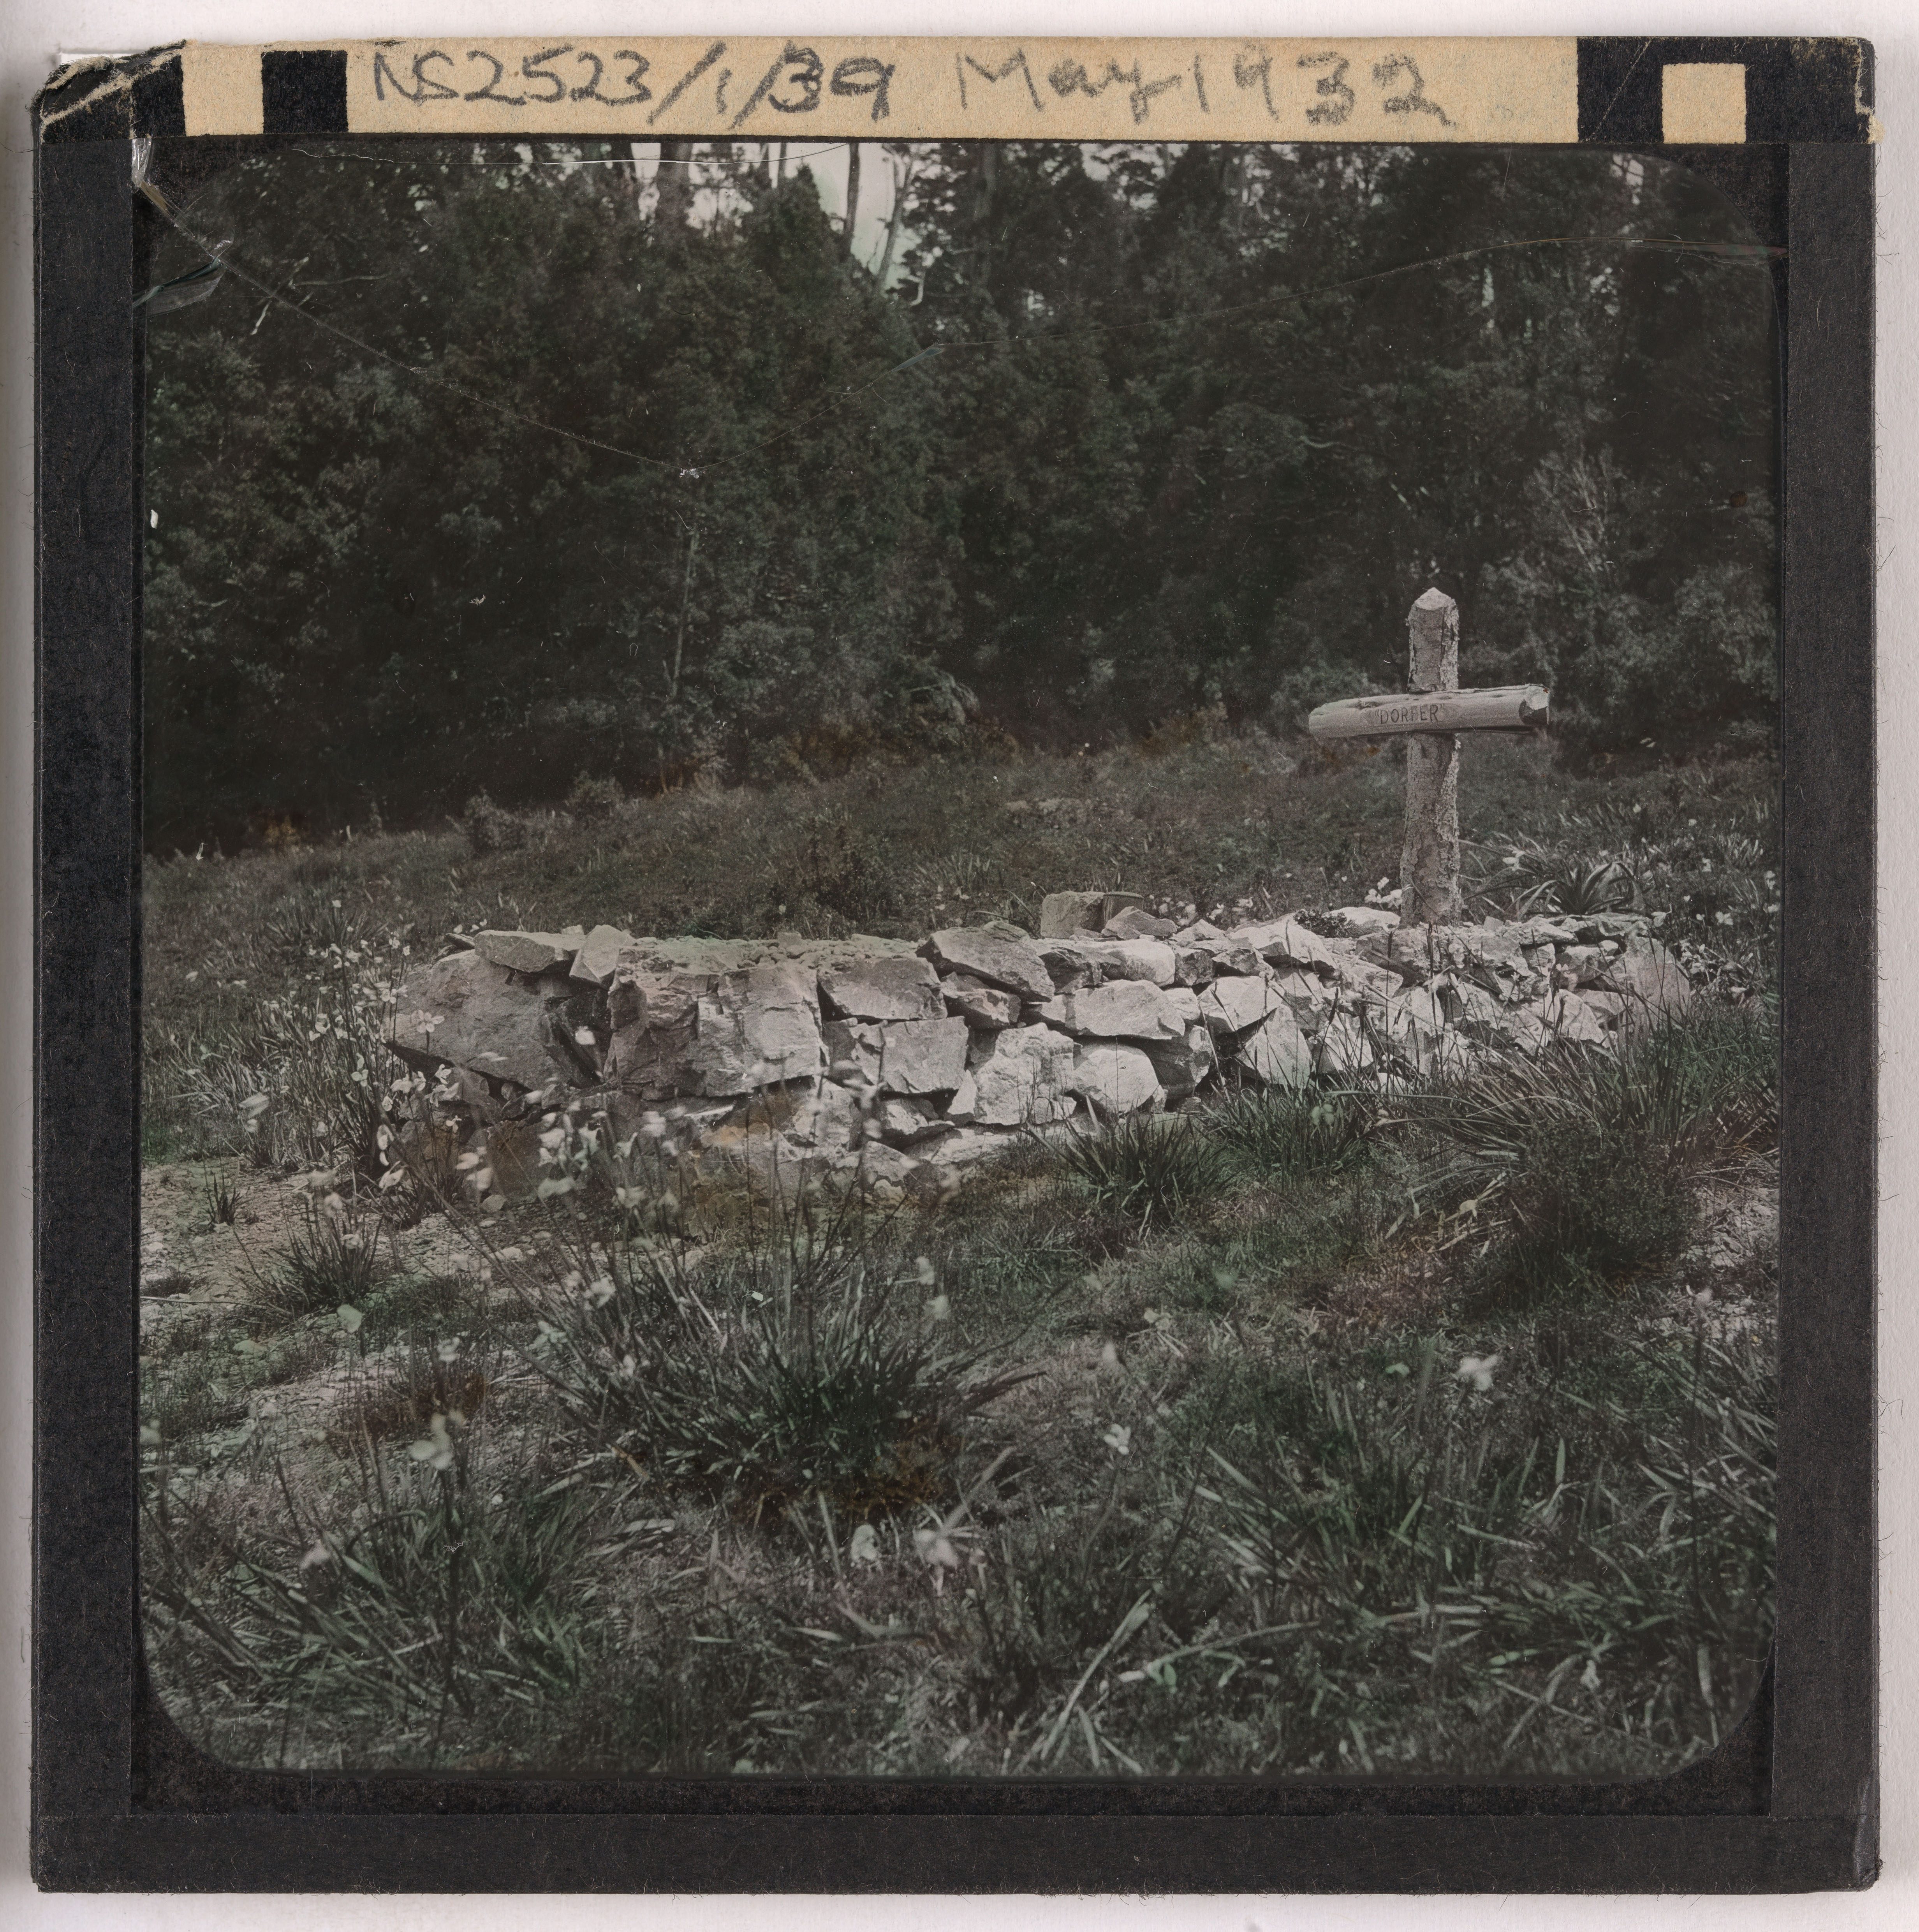 Gustav Weindorfers grave May 1932 F Smithies Collection Tasmanian Archives NS2523 1 39